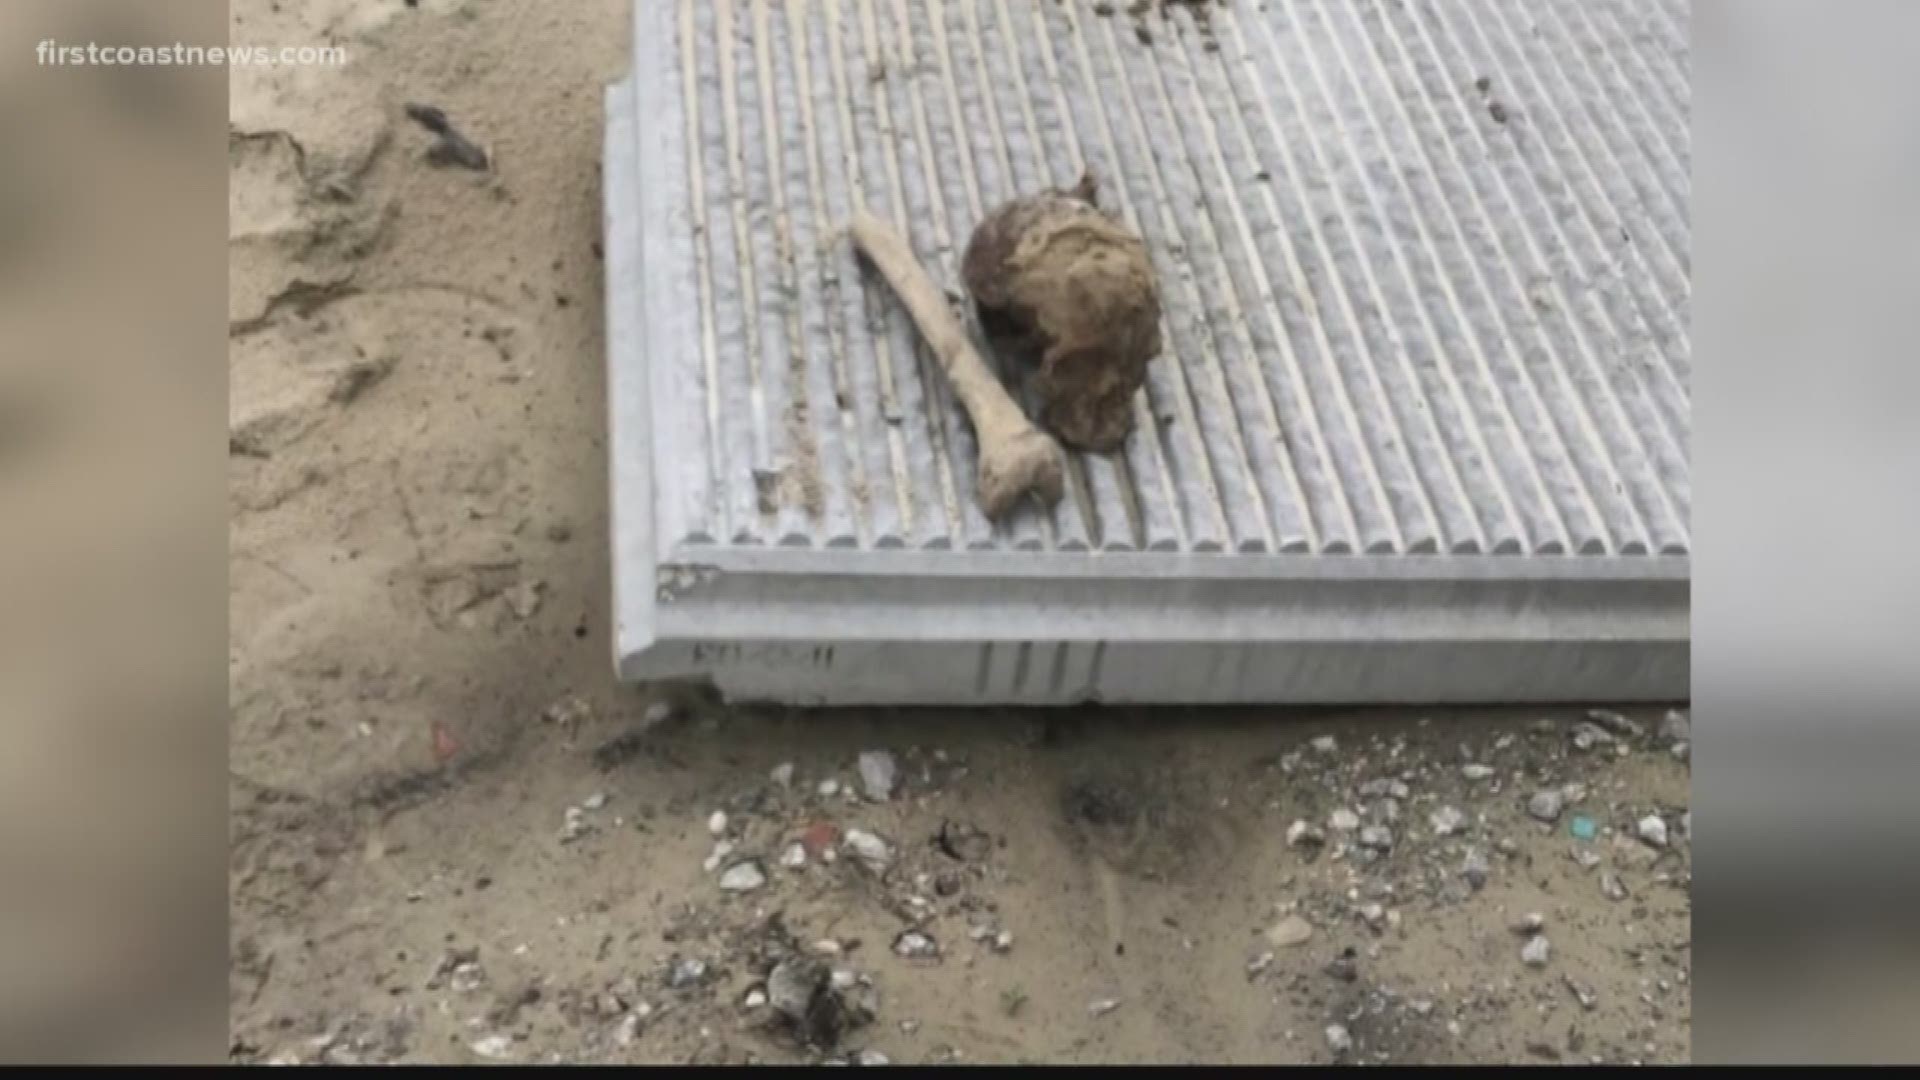 A day after human bones were found at a construction site in Jacksonville, a seasoned forensic expert describes what investigators are up against.